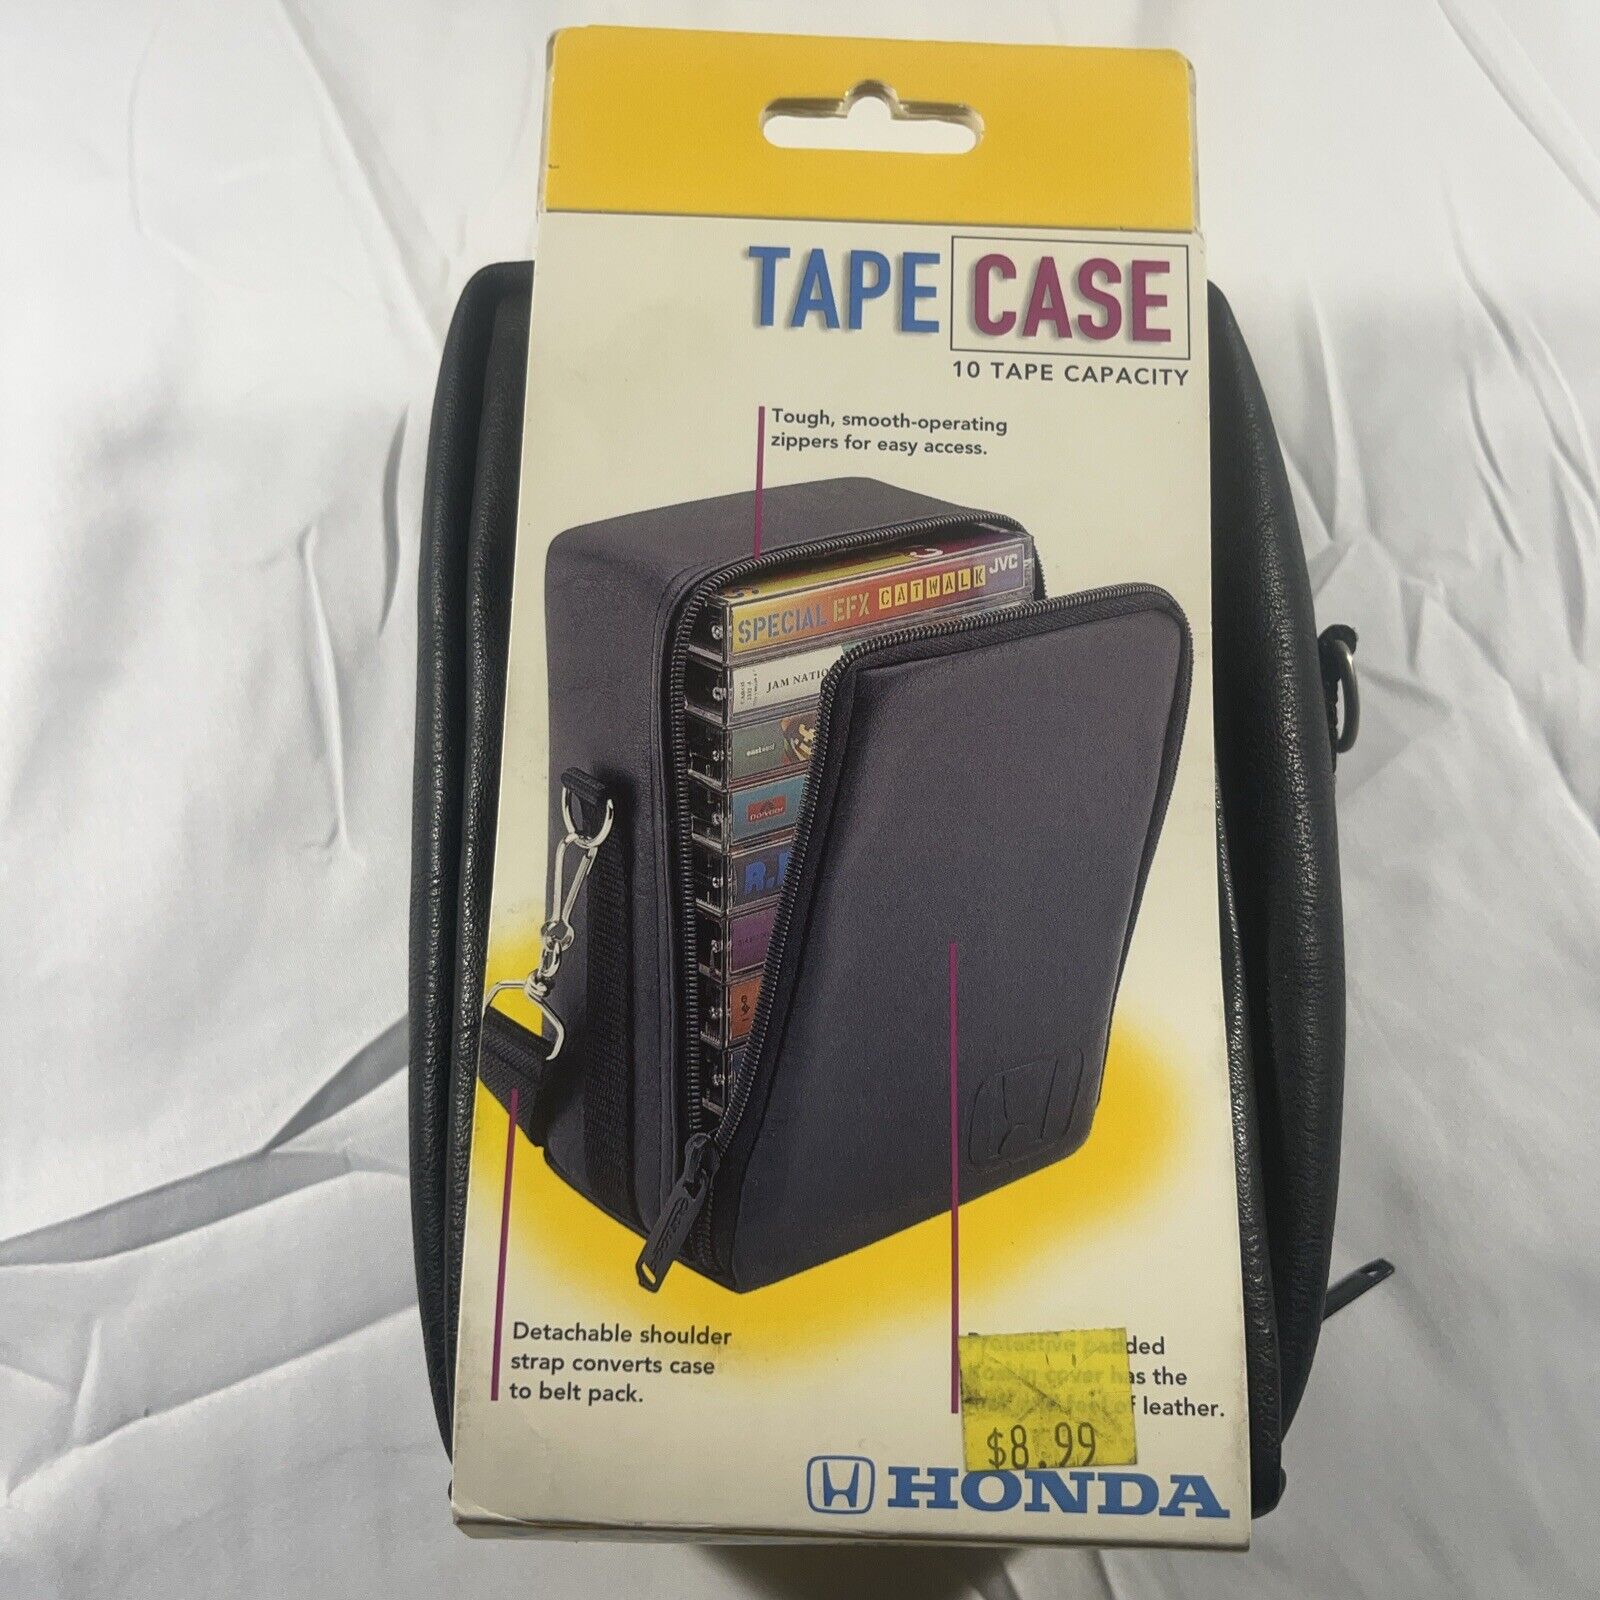 New Honda Tape Case 10 Capacity Cassette Carry Case Black With Strap